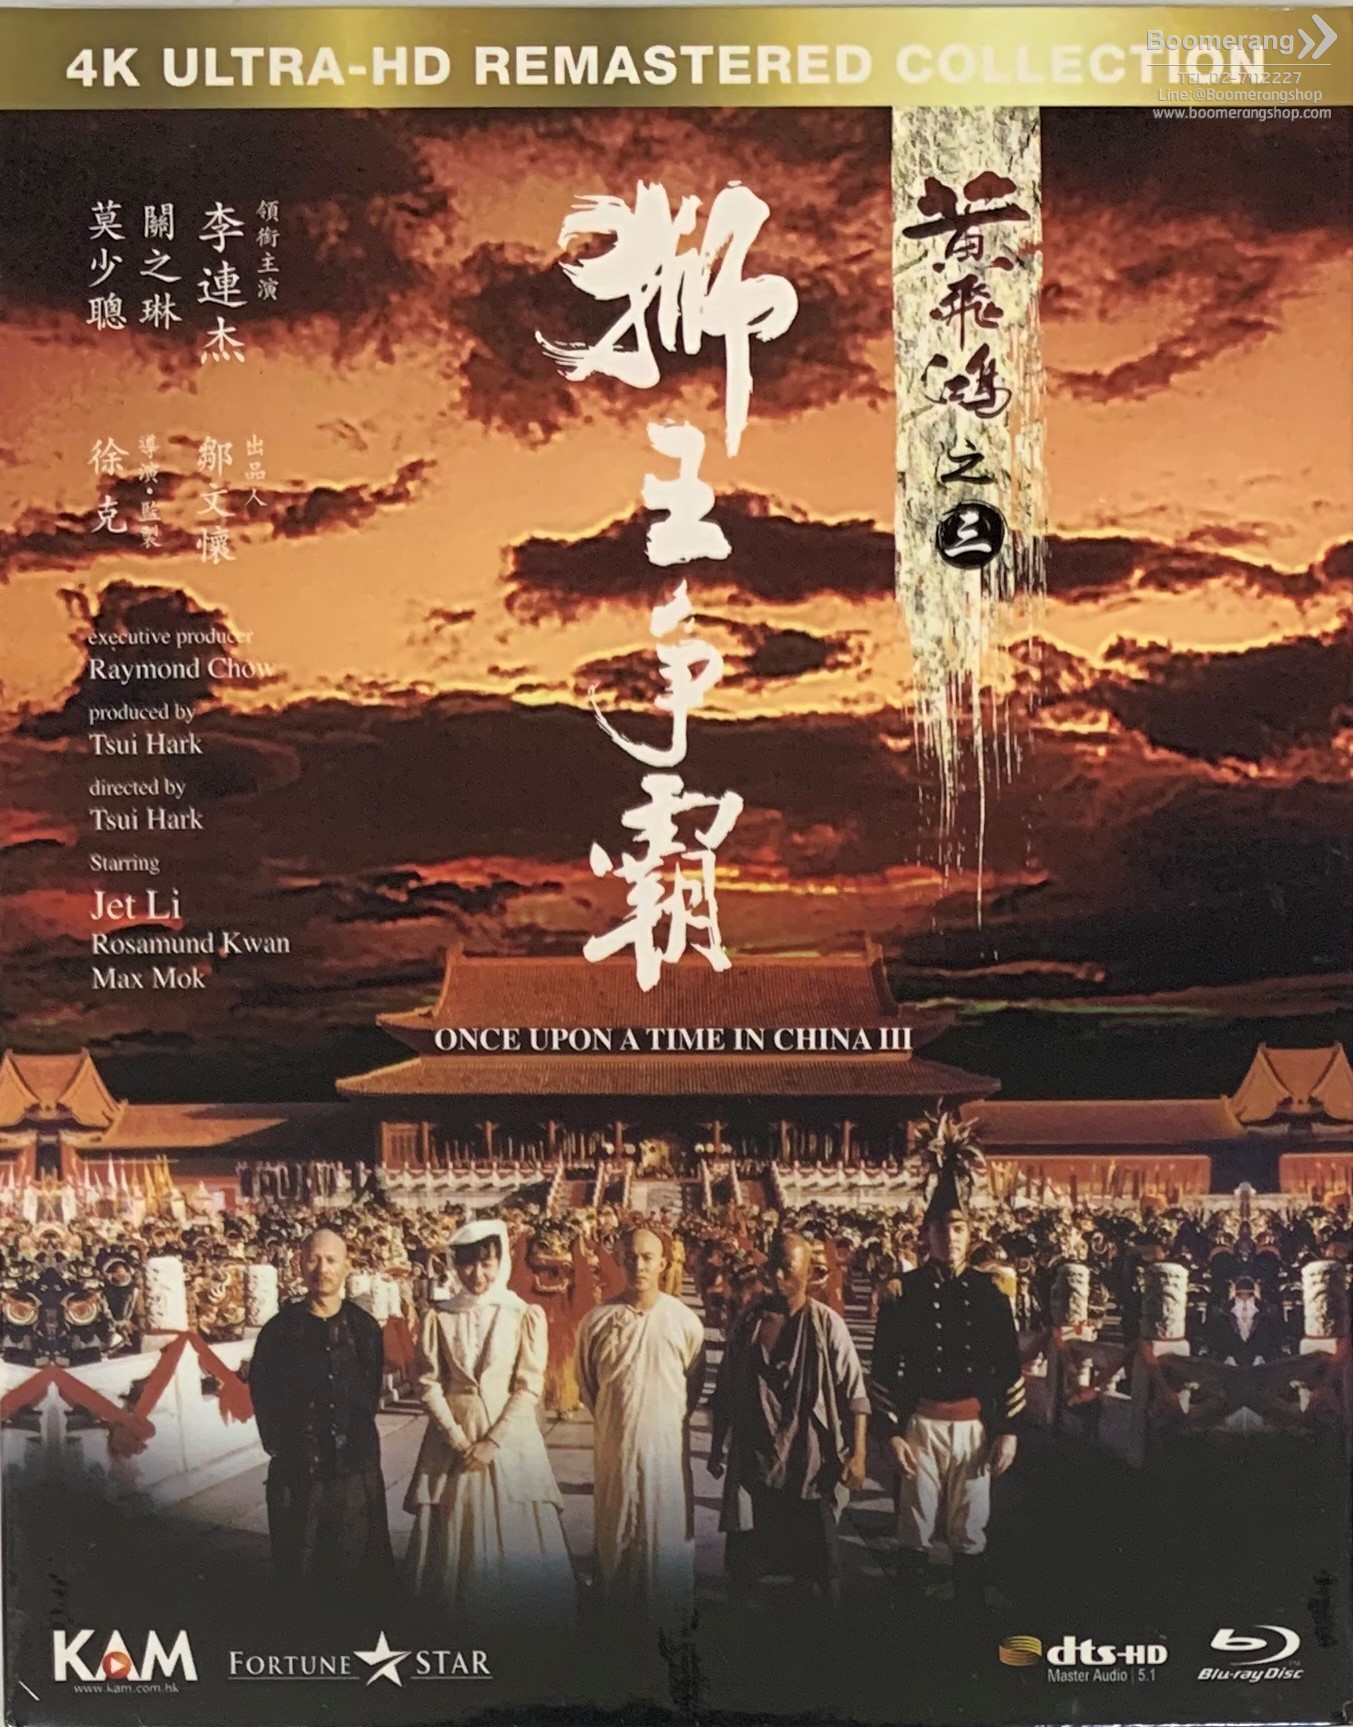 Once Upon A Time In China 3 (1993) (4K Ultra HD Remastered, Asia